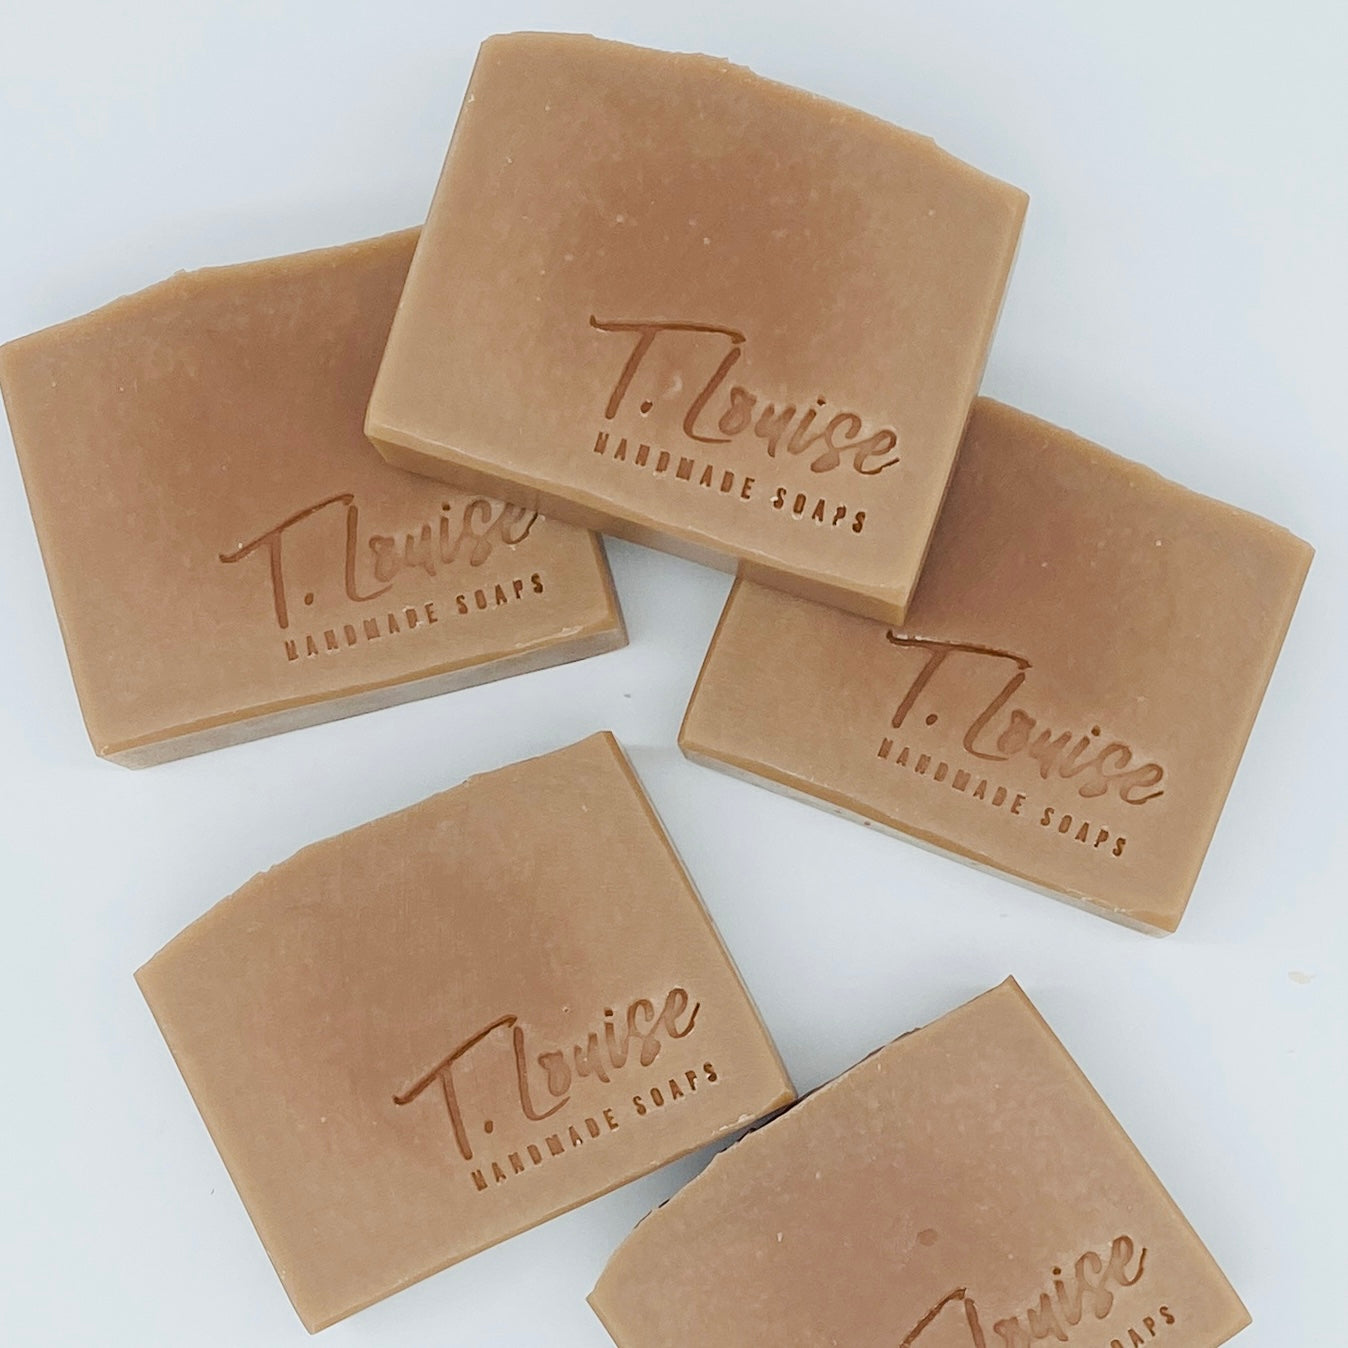 Mulberry & Thyme Soap, T. Louise Soaps - Coconut free soaps